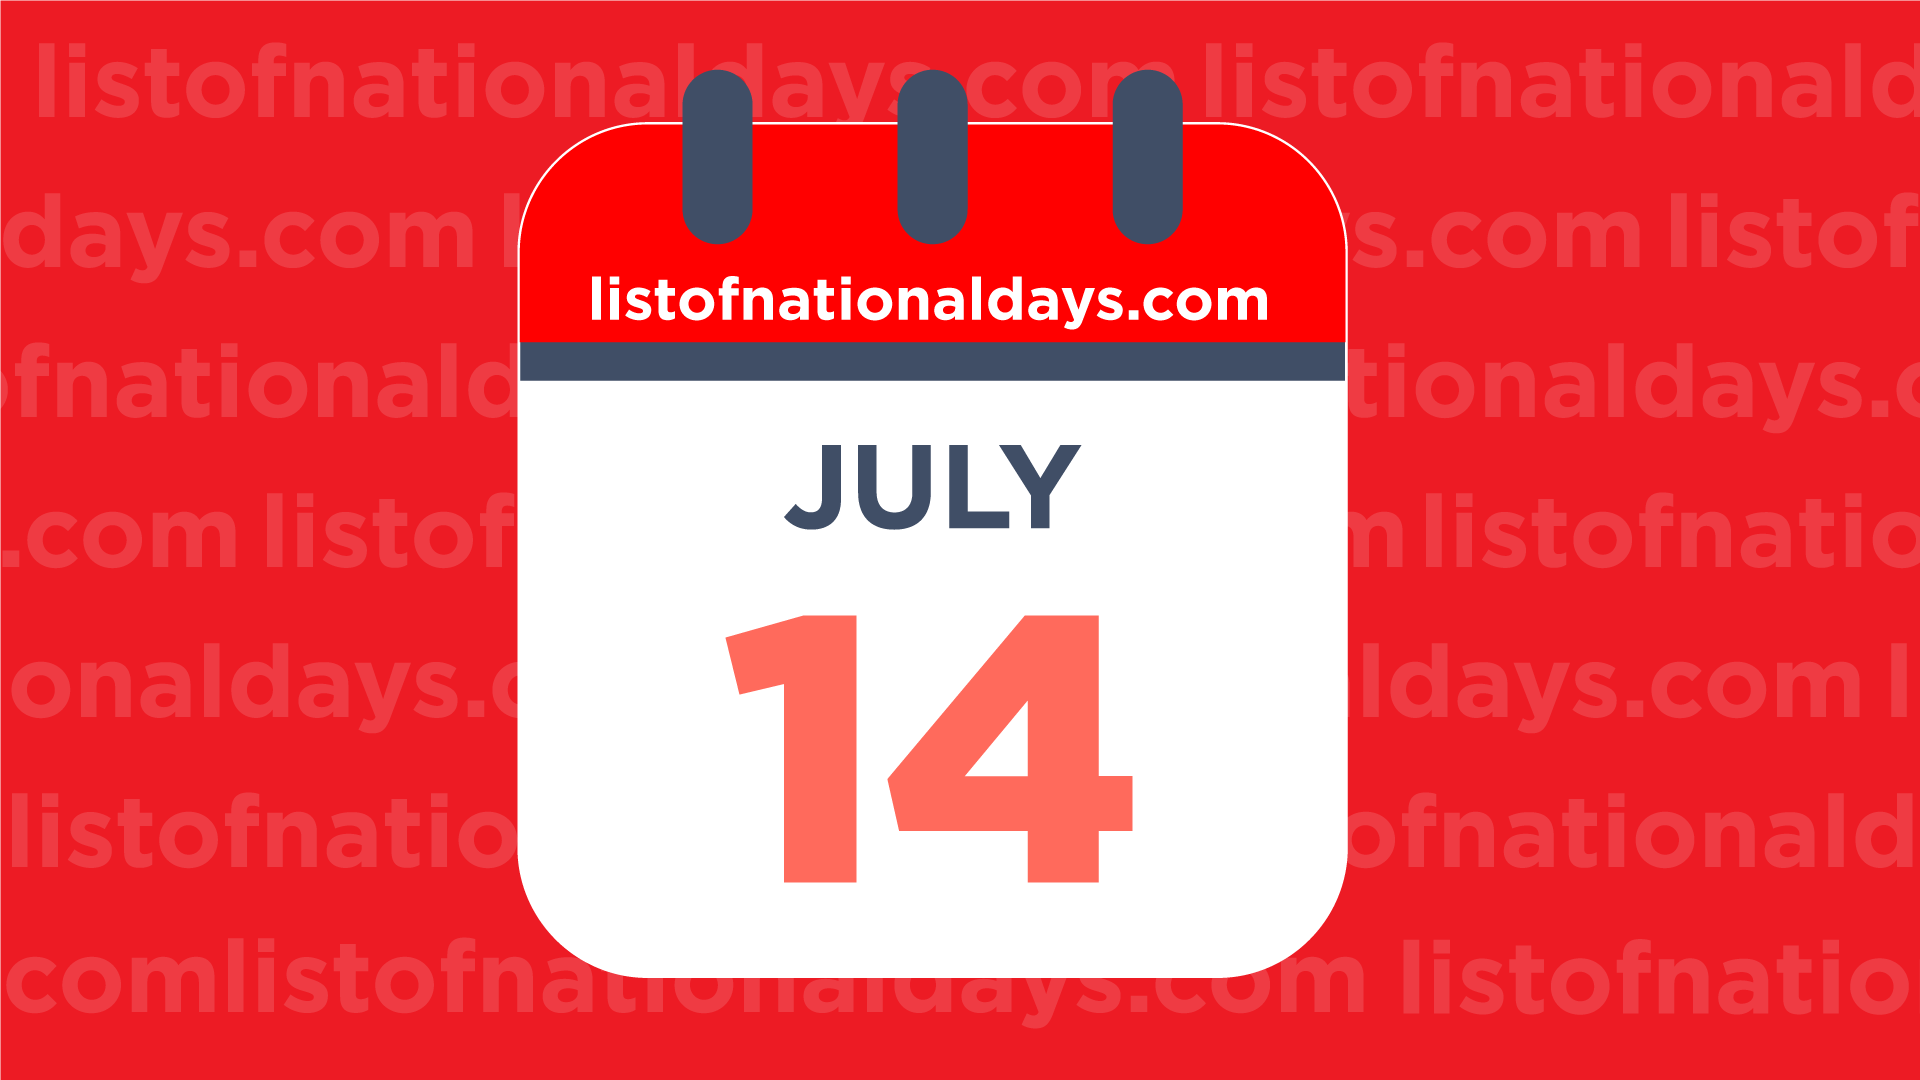 The List: For July 14, 2012